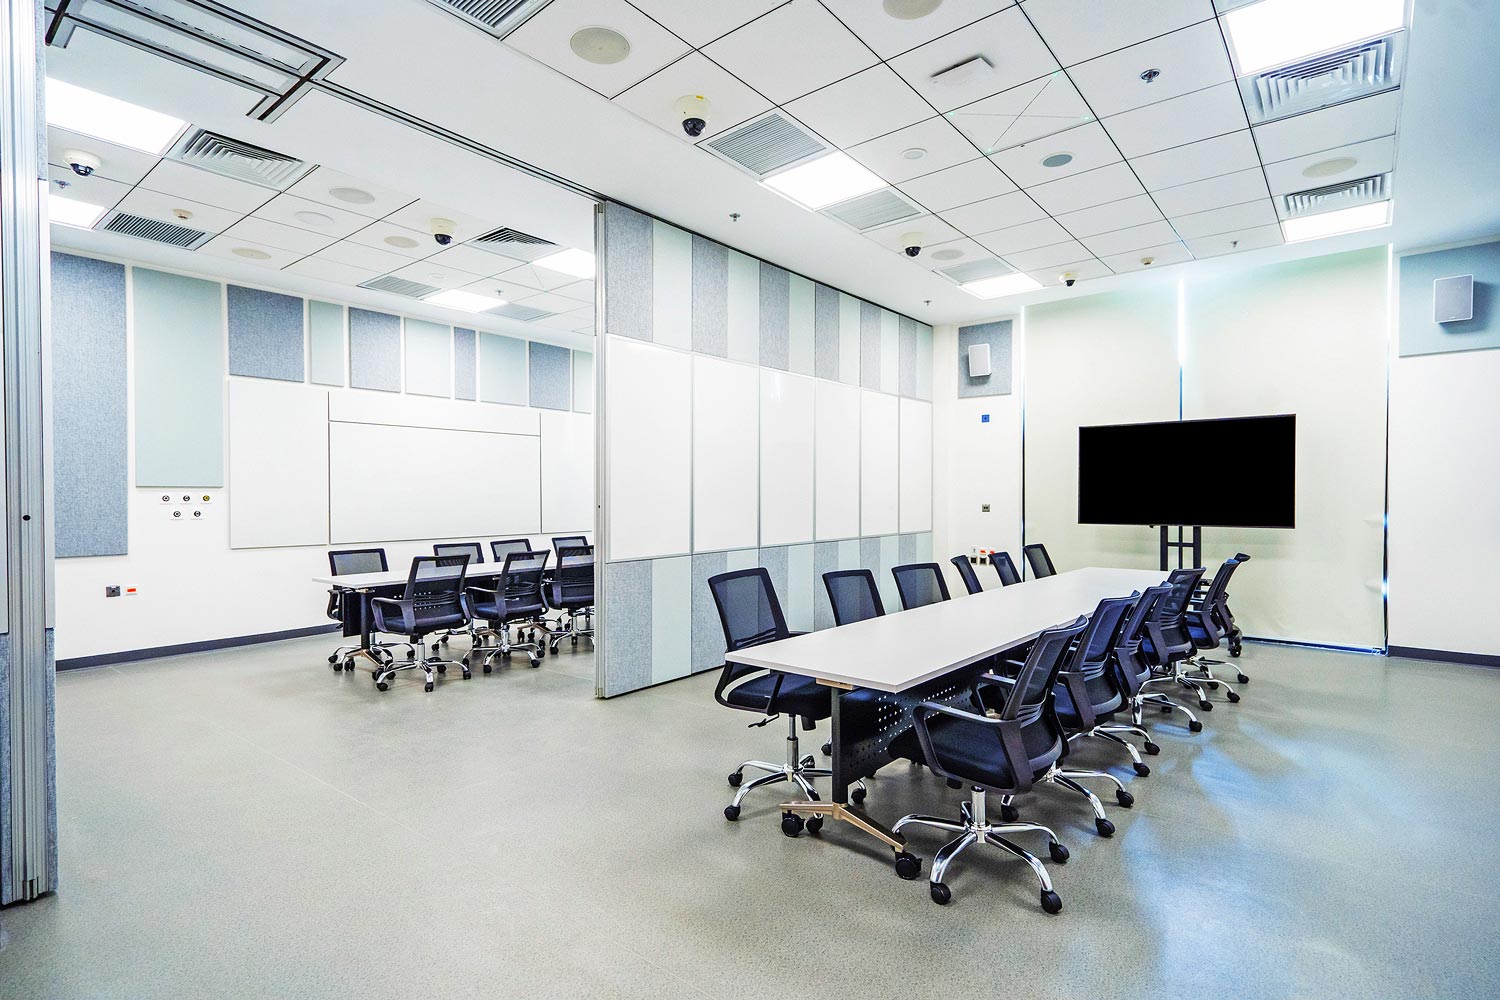 Meeting spaces such as this debriefing room enable students and staff to review exercises and training scenarios captured with an Extron SMP 351 streaming media processor.